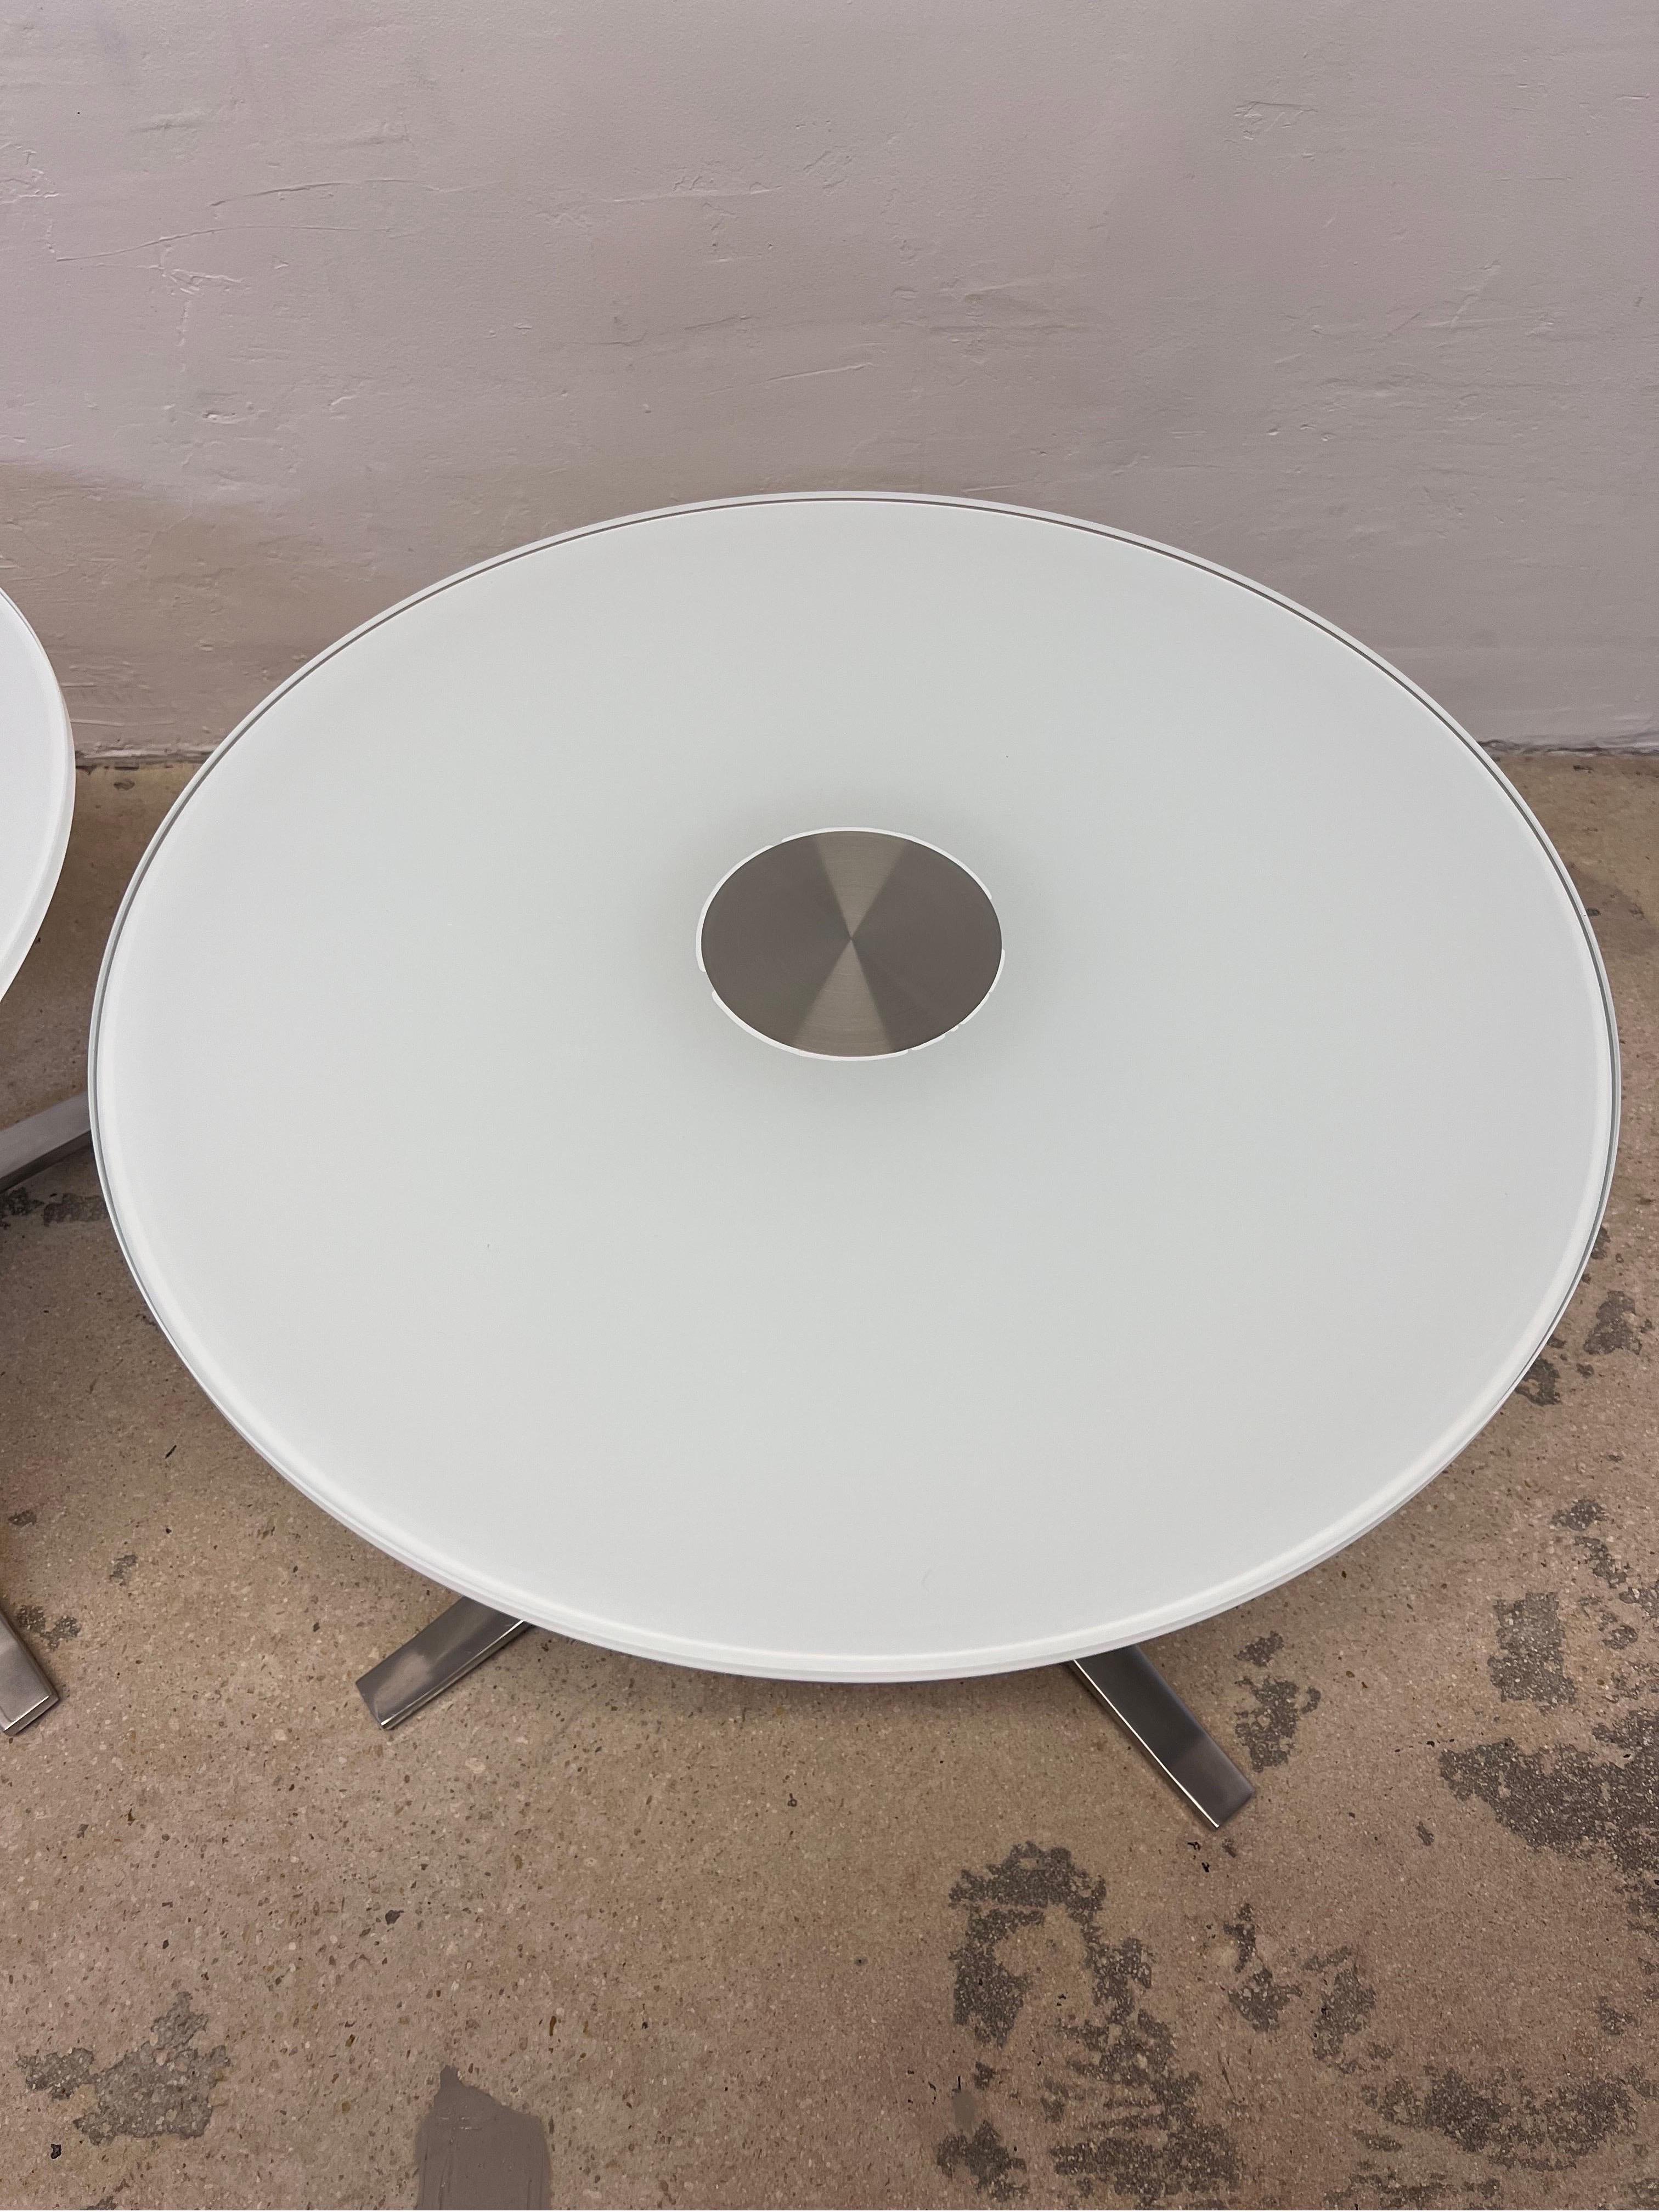 Pearson Lloyd Bob's Side Tables With Round Glass Tops for Coalesse, a Pair For Sale 4